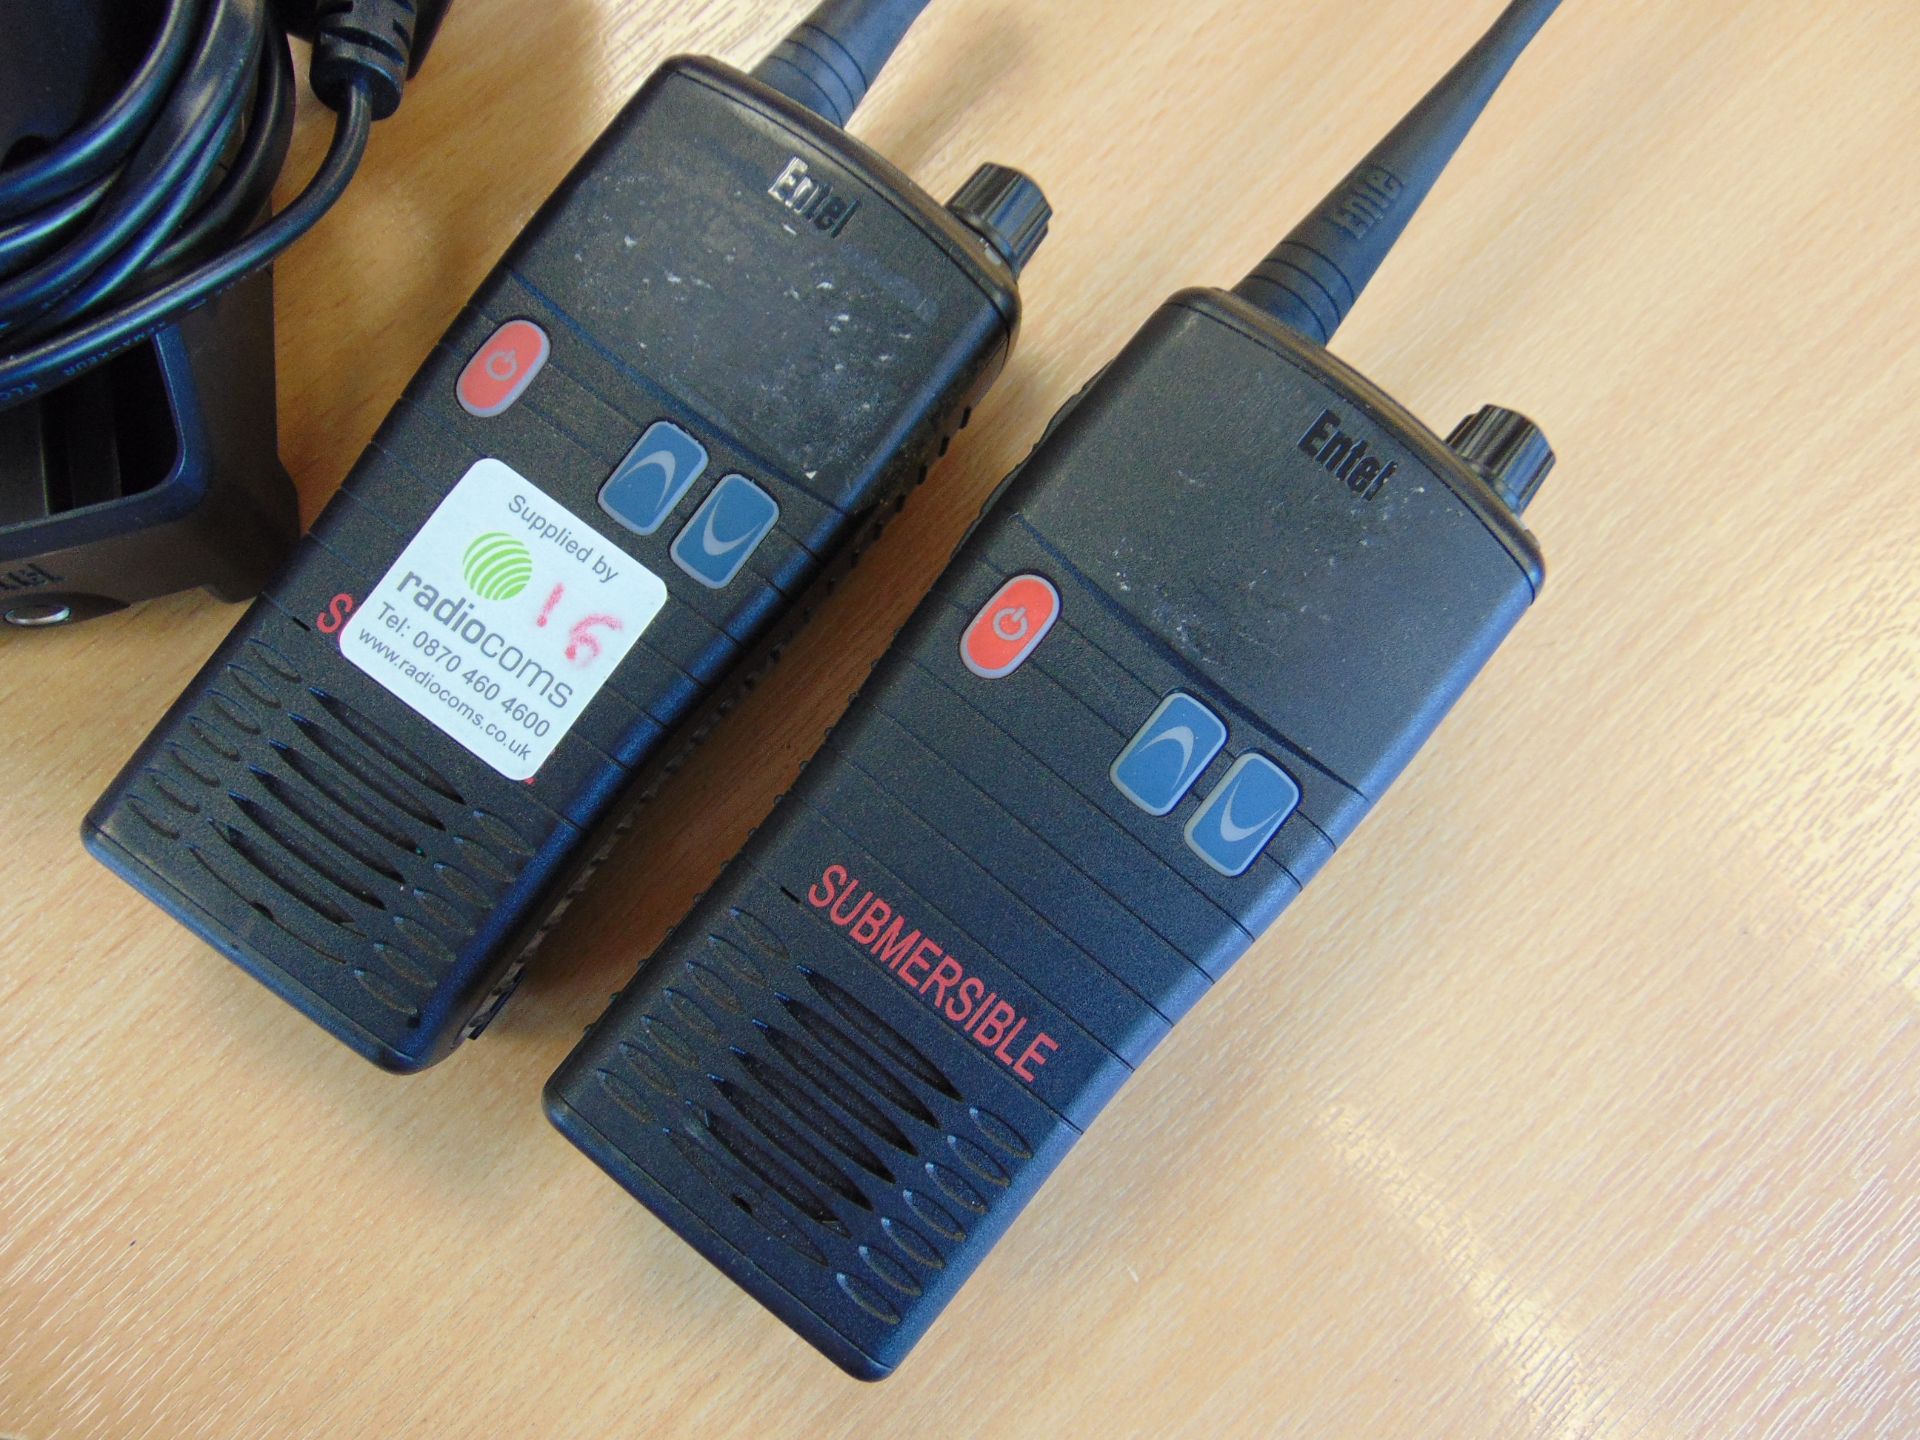 2x Entel HT782 UHF Waterproof Two Way Radios C/W Battery Charger - Image 2 of 6